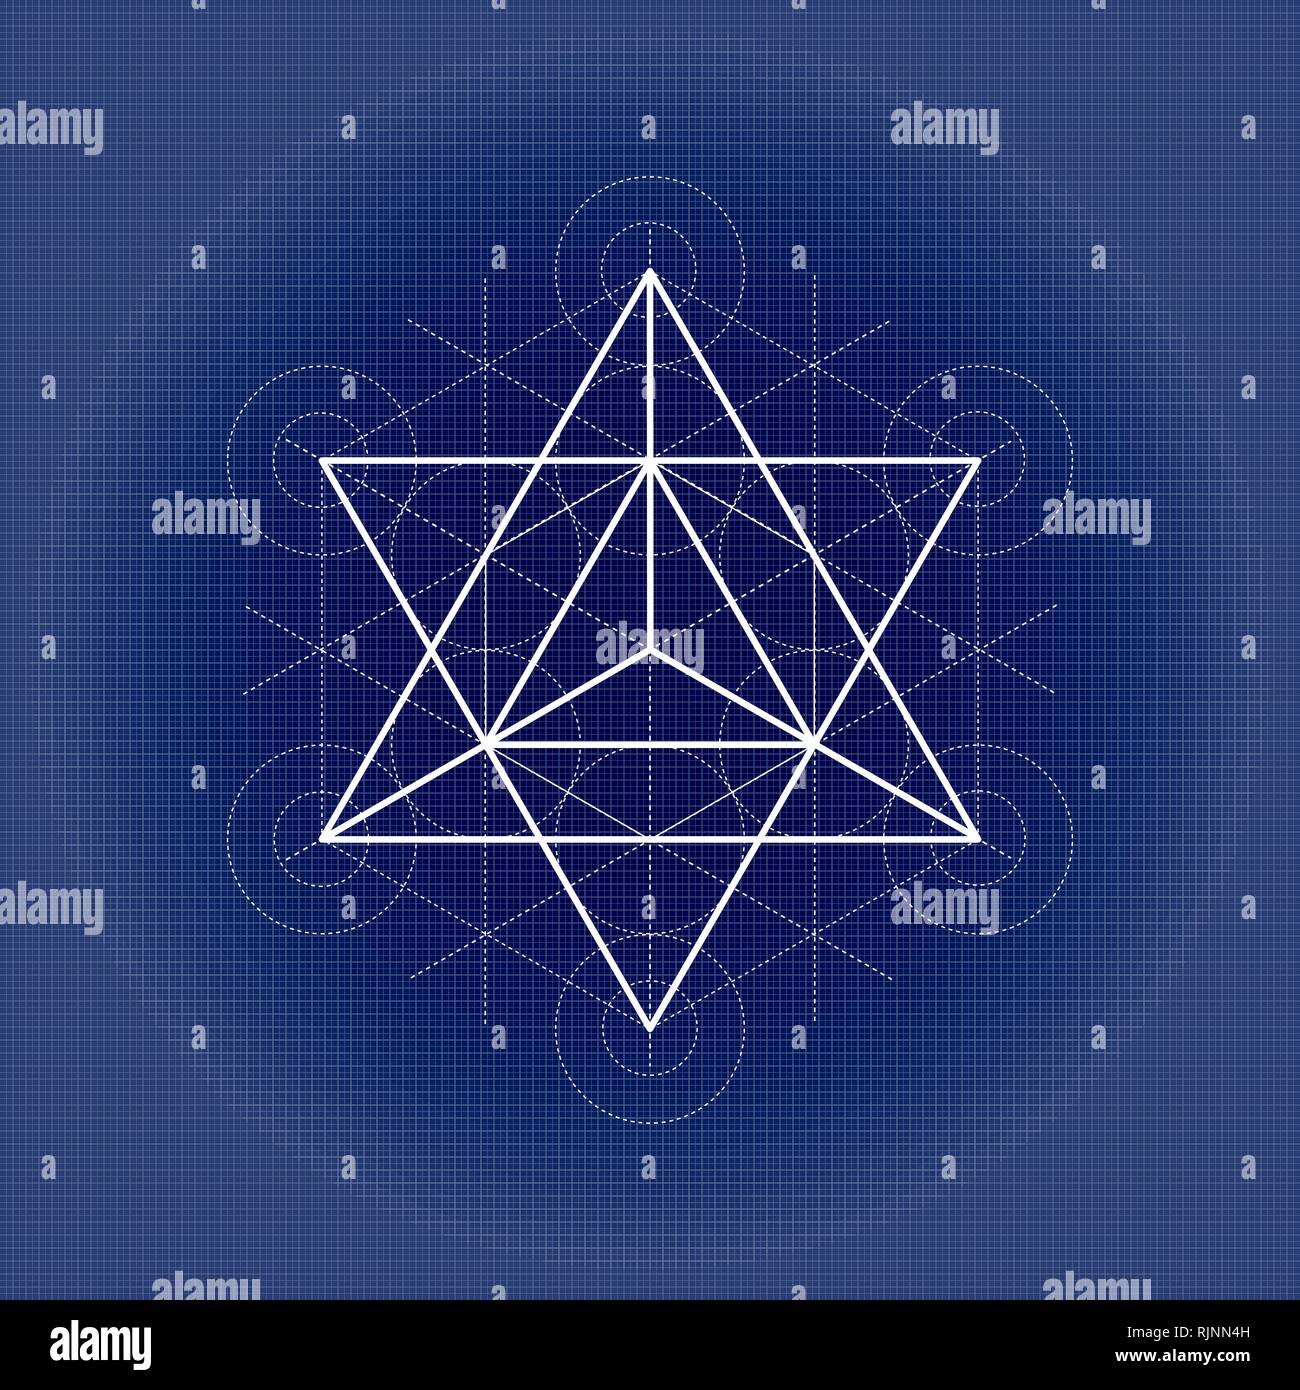 Star tetrahedron from Metatrons cube sacred geometry on technical paper Stock Vector